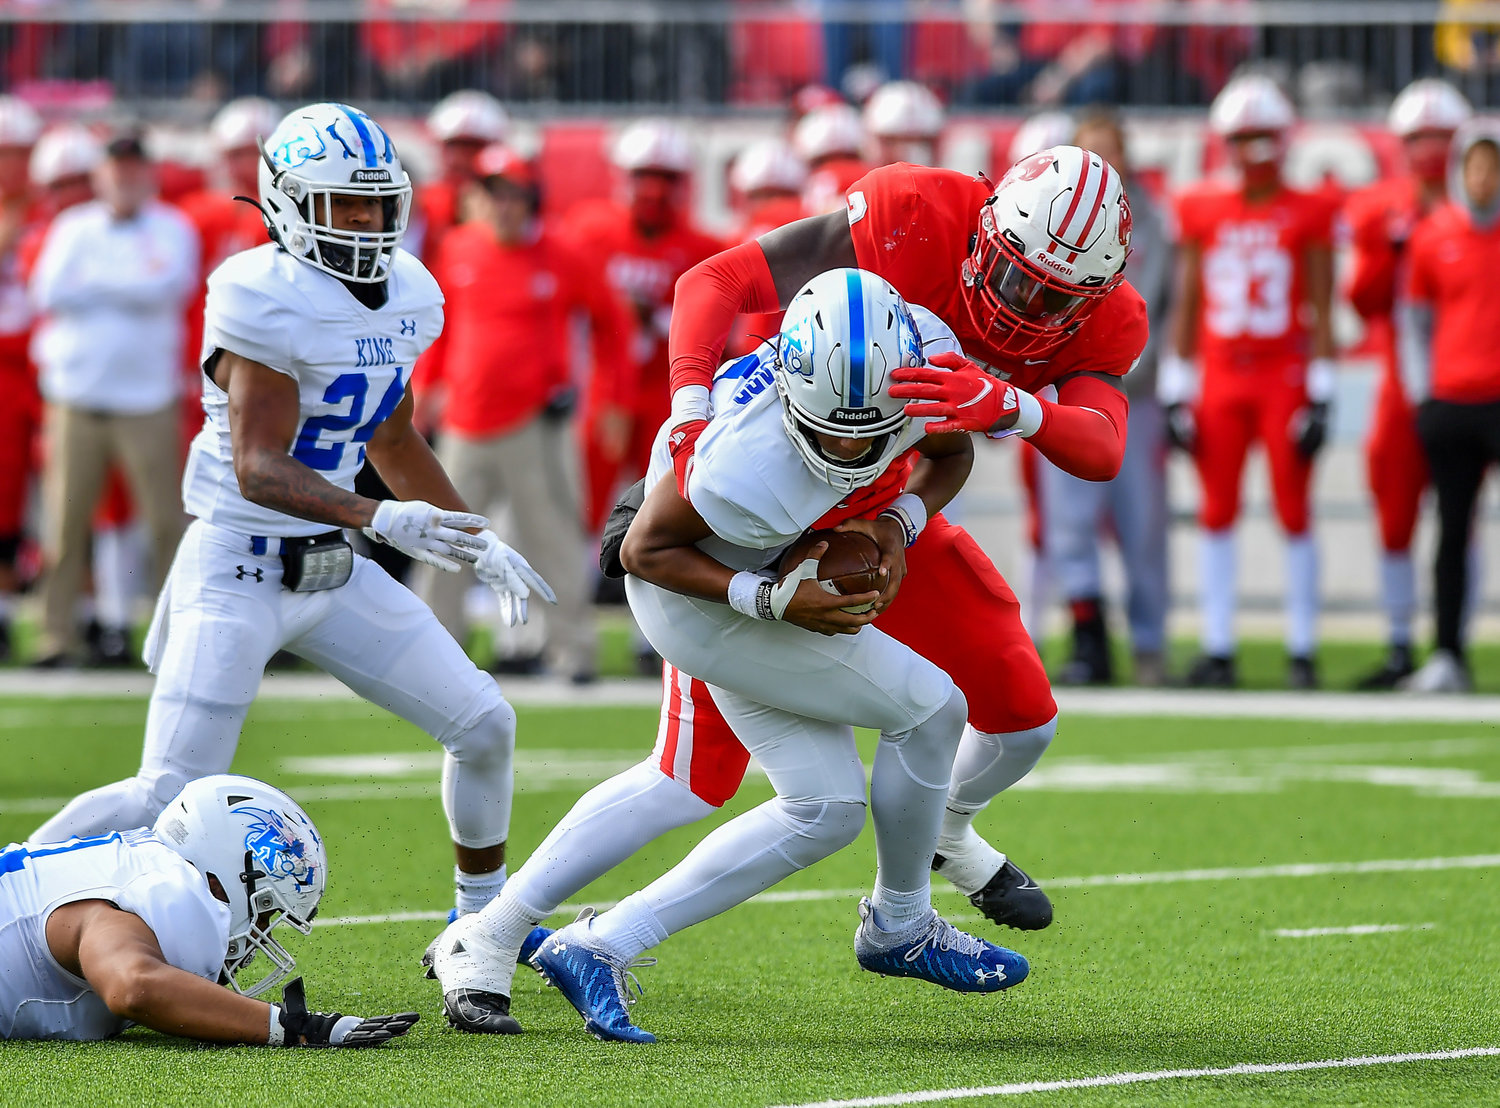 Katy Tx. Nov 26, 2021: Katy's #2 Malik Sylla gets the sack on King Panthers QB Nehemiah Brousard #11 during the UIL regional playoff game between Katy Tigers and King Panthers at Legacy Stadium in Katy. (Photo by Mark Goodman / Katy Times)